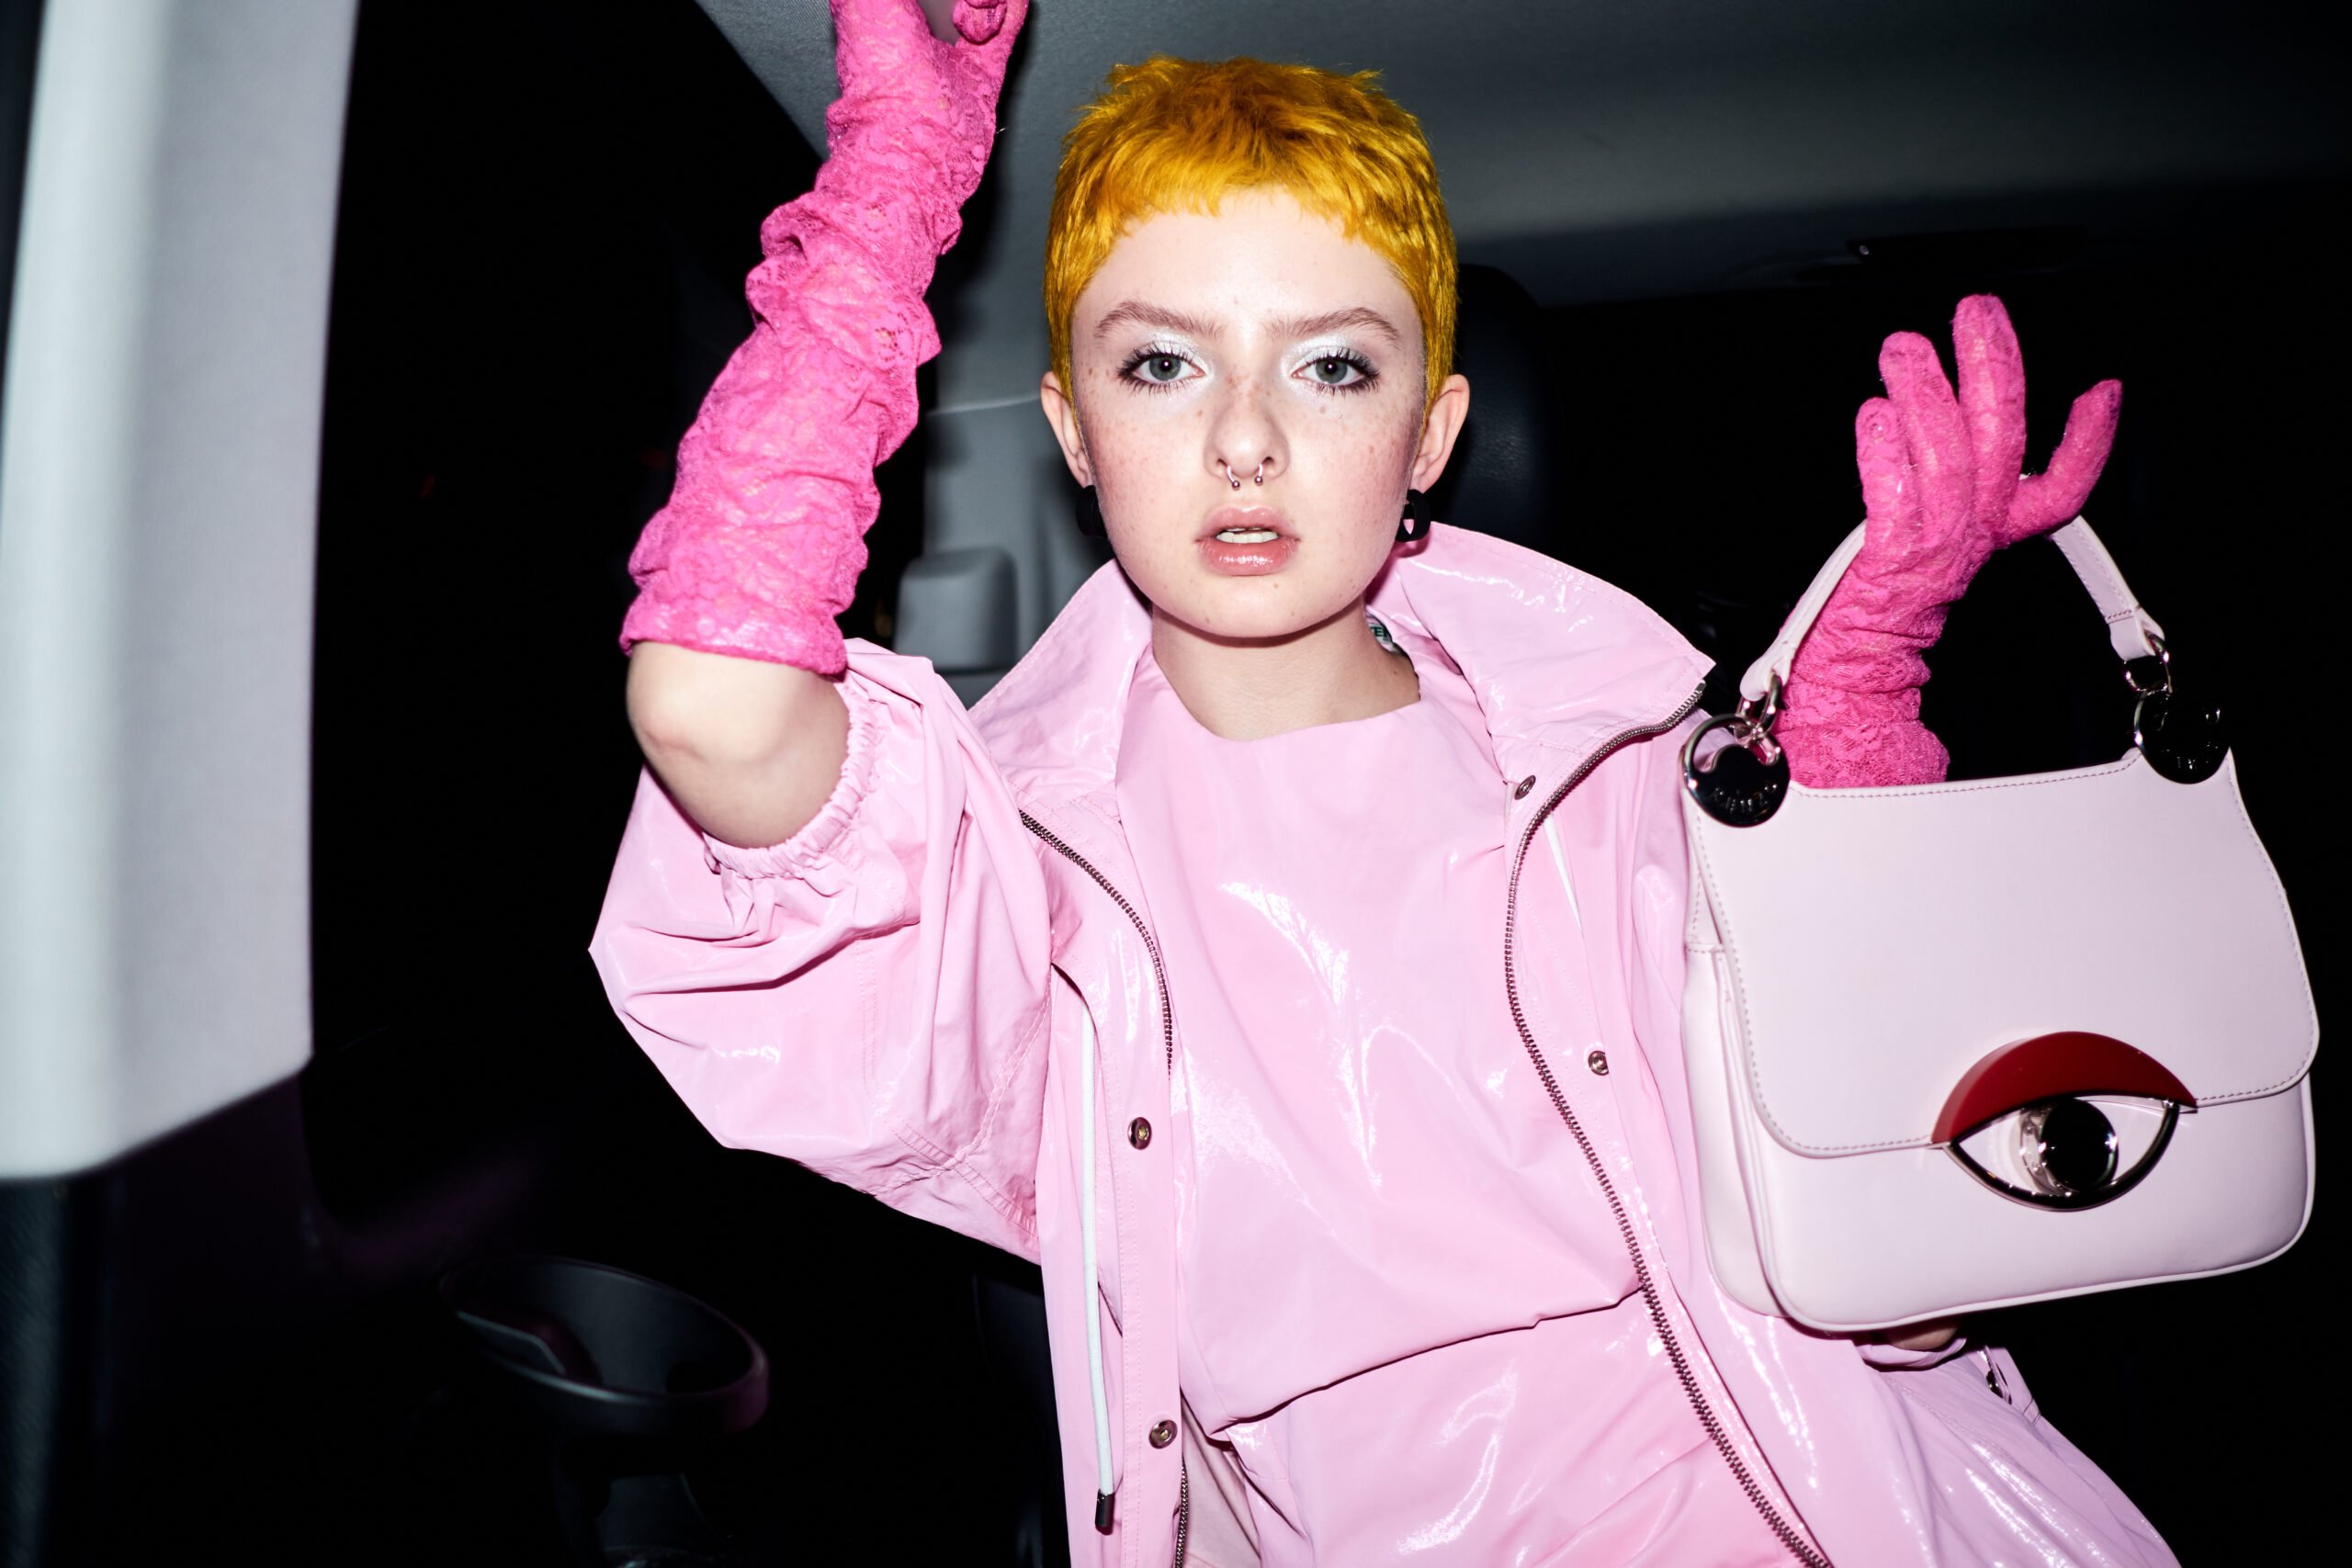 Jillian Clark's photo of Lachlan Watson is wearing a candy pink vinyl jacket and dress with hot pink gloves